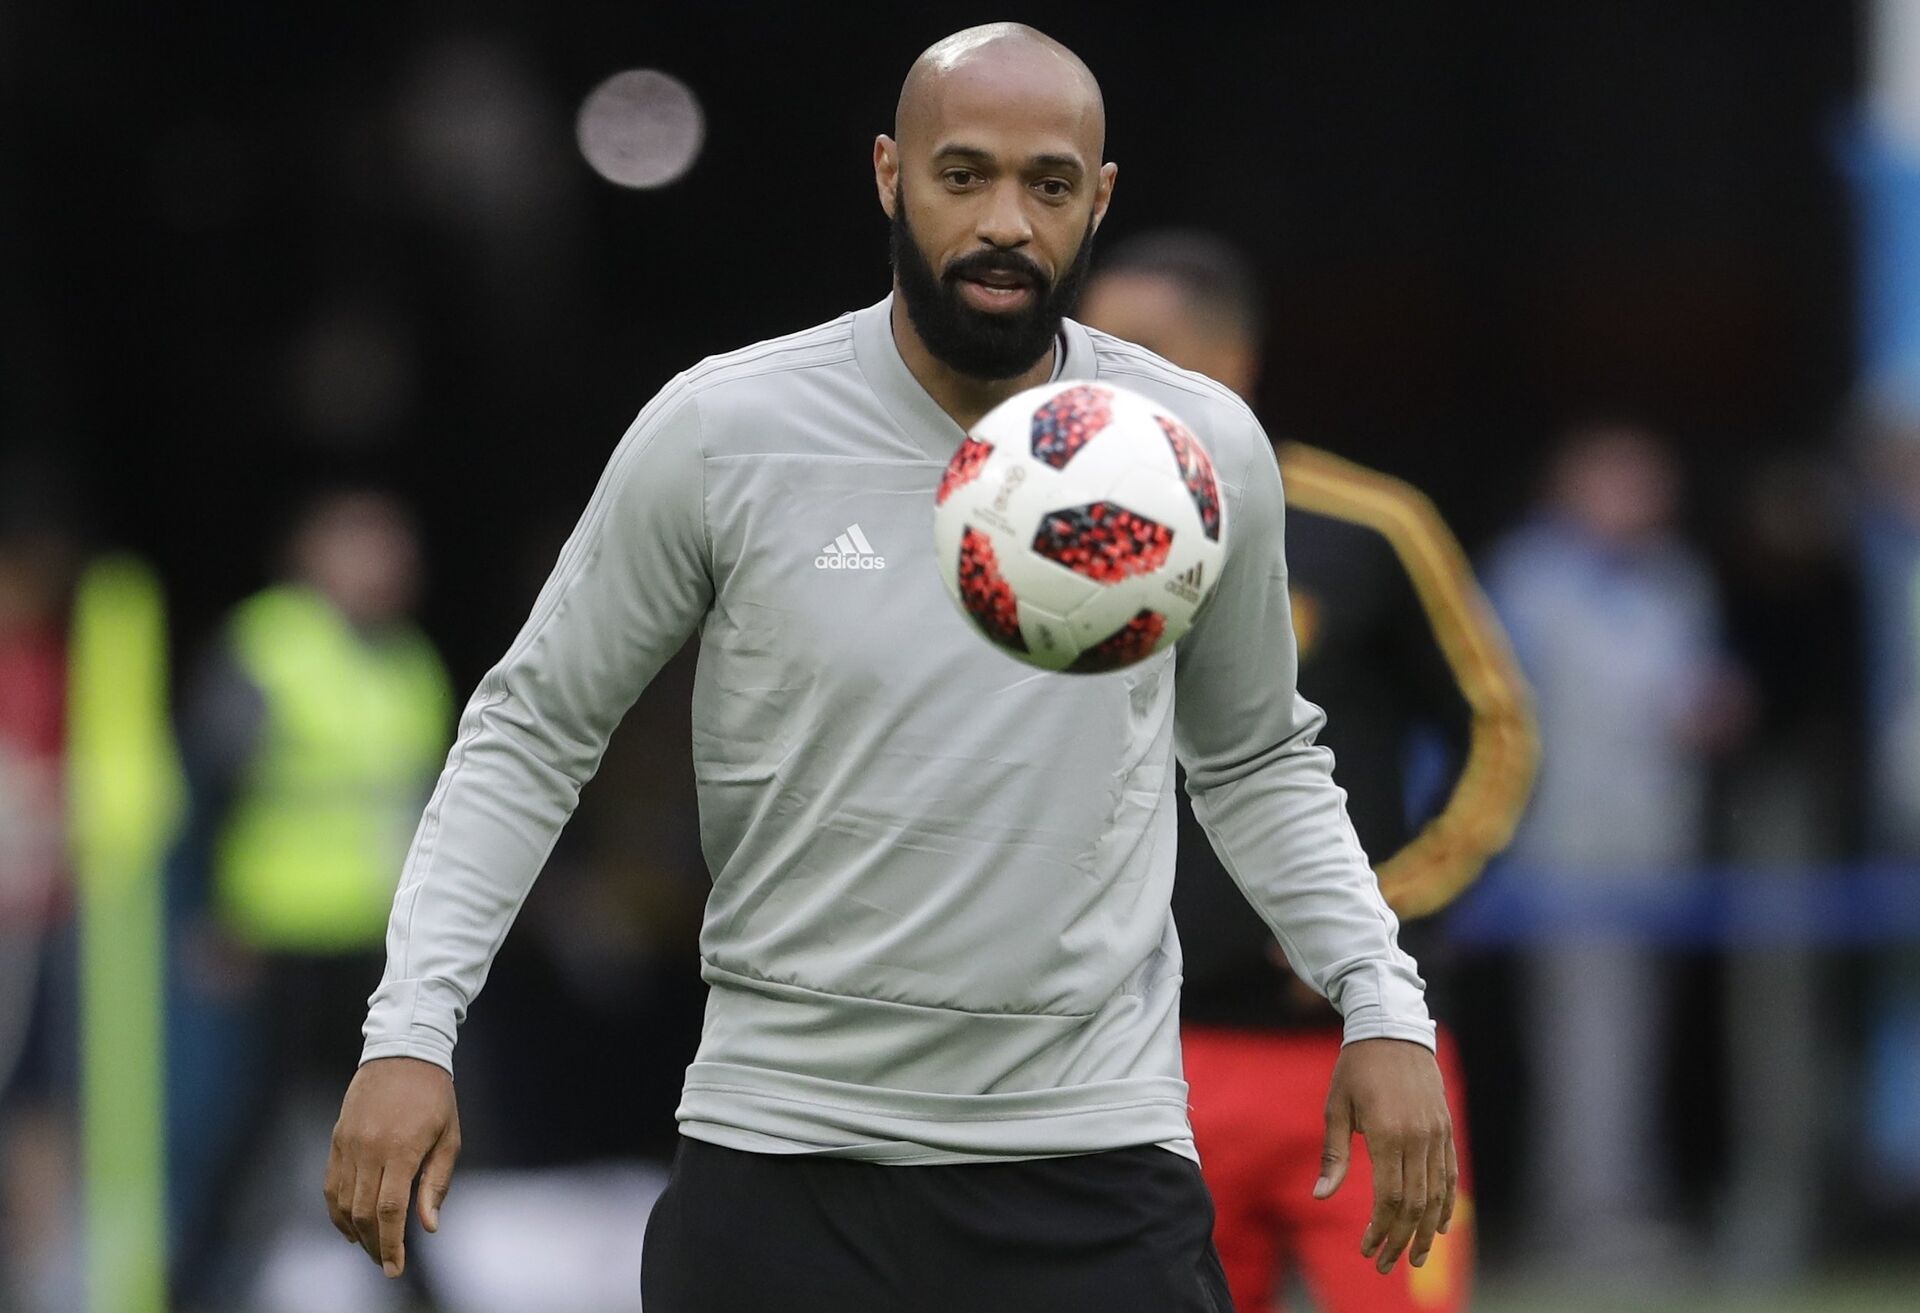 Belgium assistant coach Thierry Henry eyes the ball prior to the semifinal match between France and Belgium at the 2018 soccer World Cup in the St. Petersburg Stadium, in St. Petersburg, Russia, Tuesday, July 10, 2018 - Sputnik International, 1920, 26.10.2021